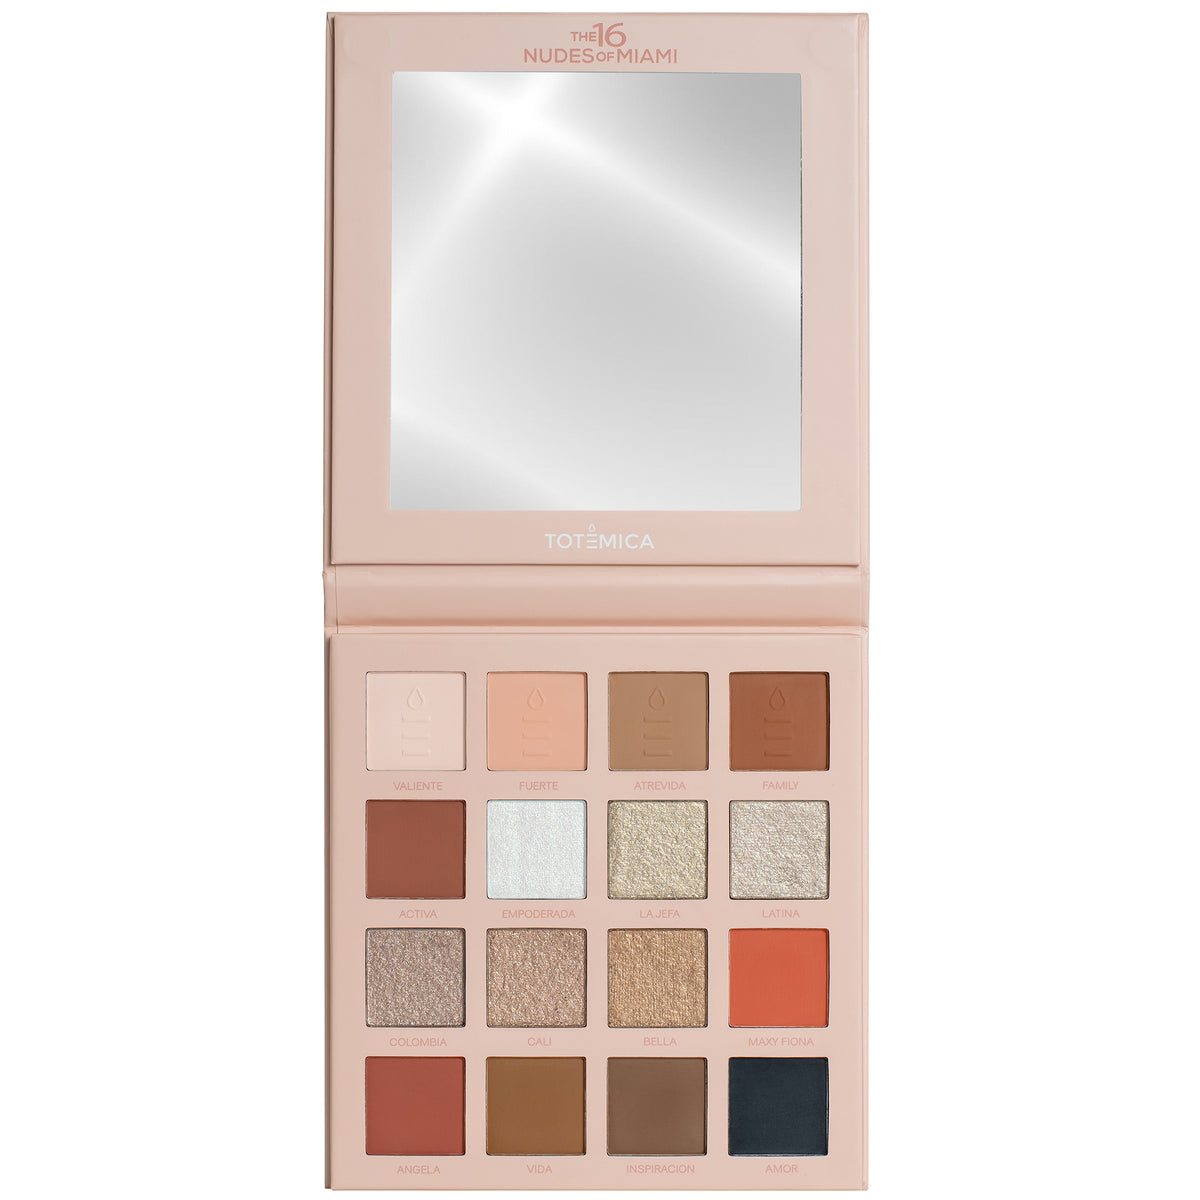 The 16 Nudes Of Miami - Totemica Makeup Palette | Wholesale